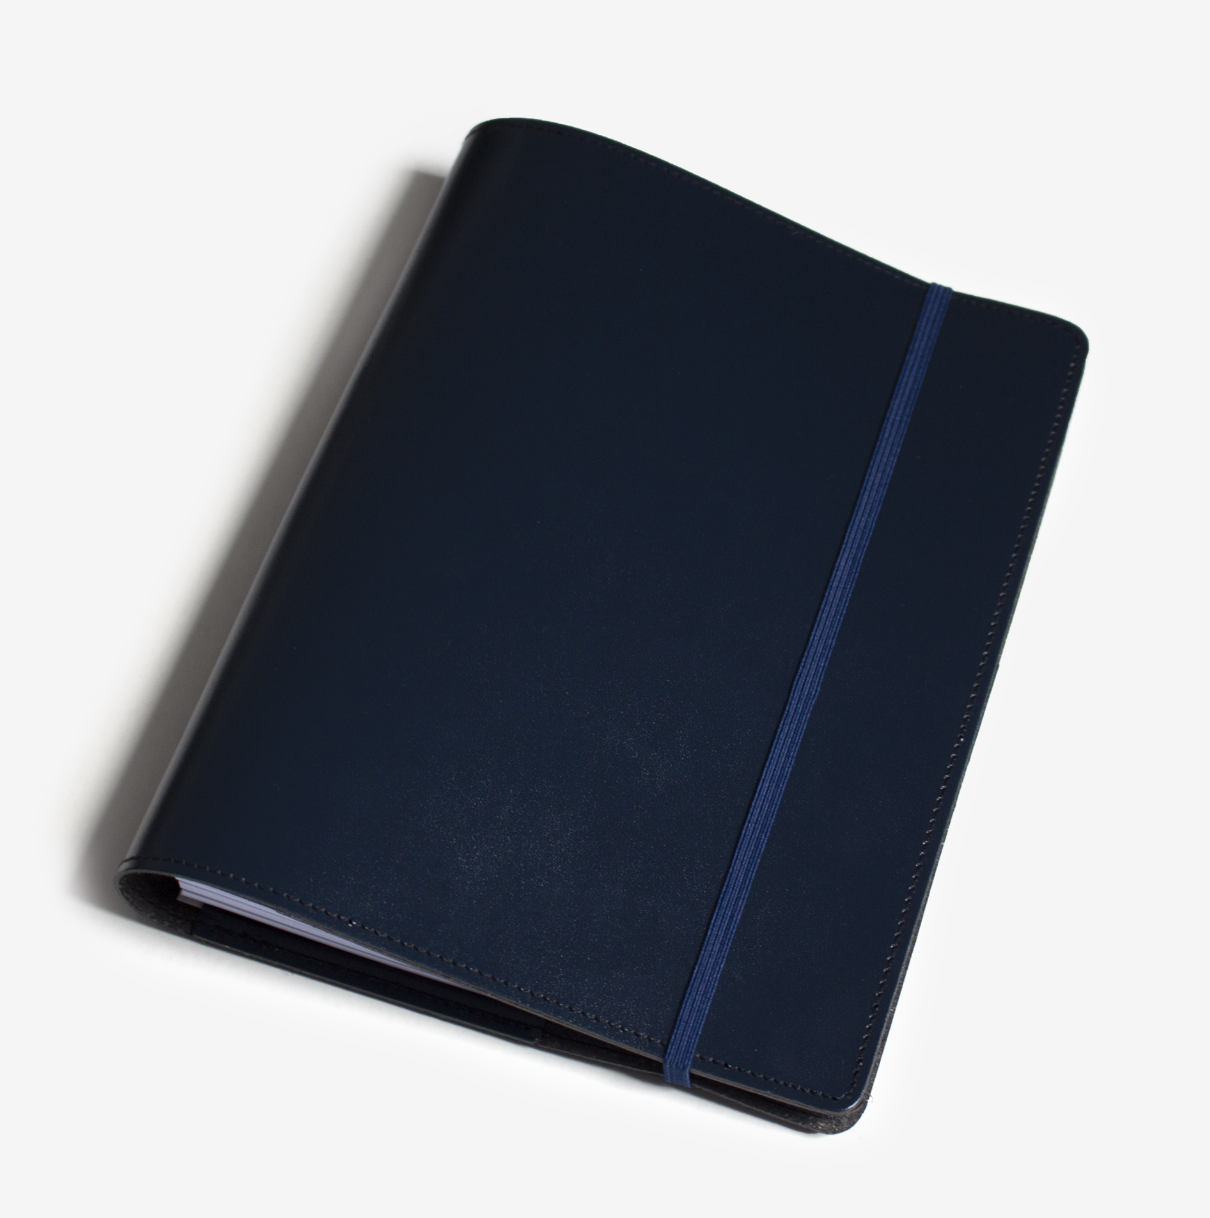 Coran & Blair A5 Leather Journal Navy Made of Fridays